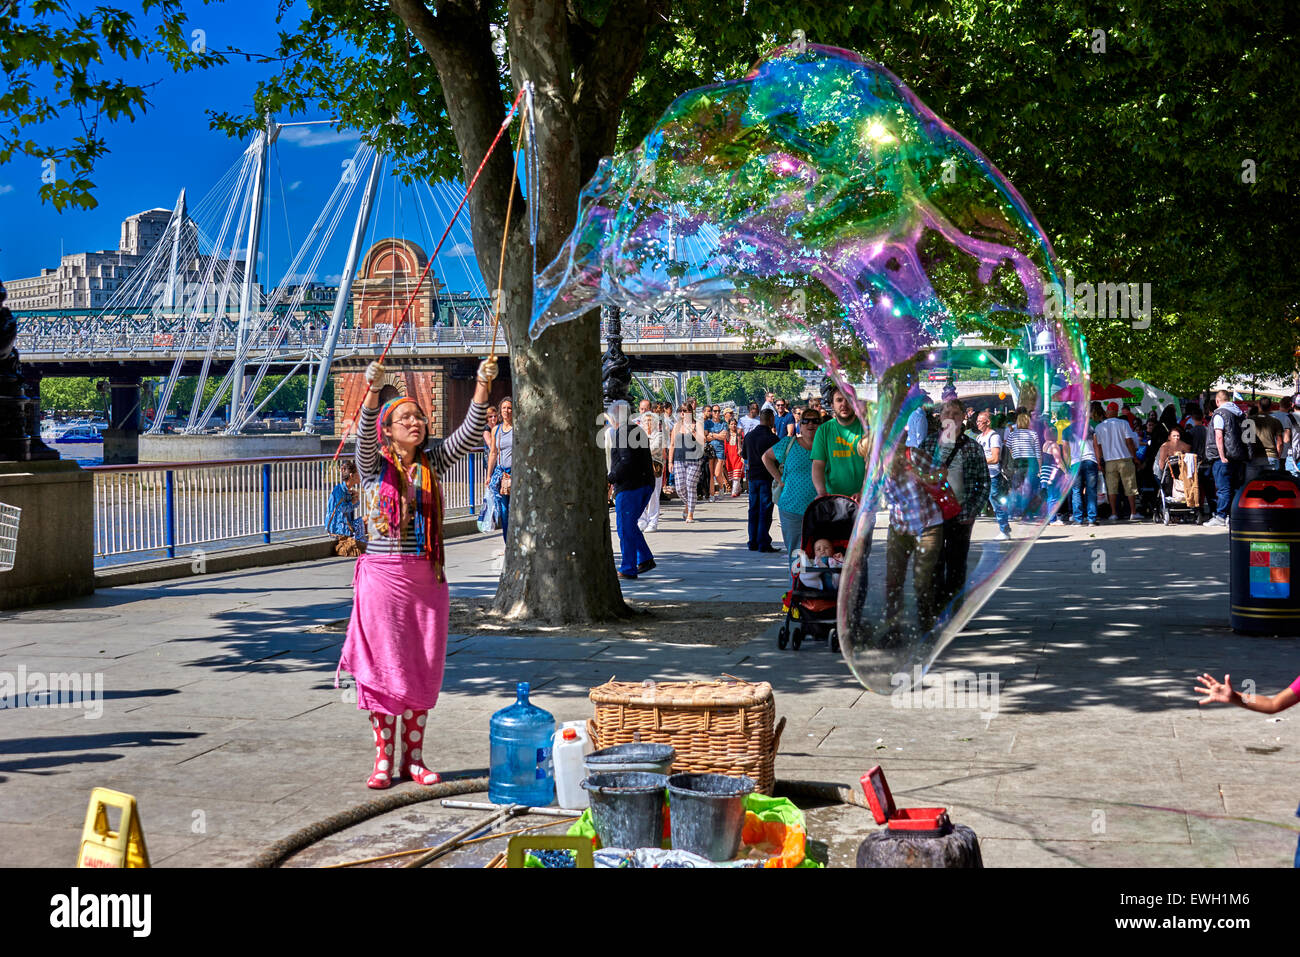 Street performers in Jubilee Gardens Public Park on the South Bank in the London Borough of Lambeth. Stock Photo